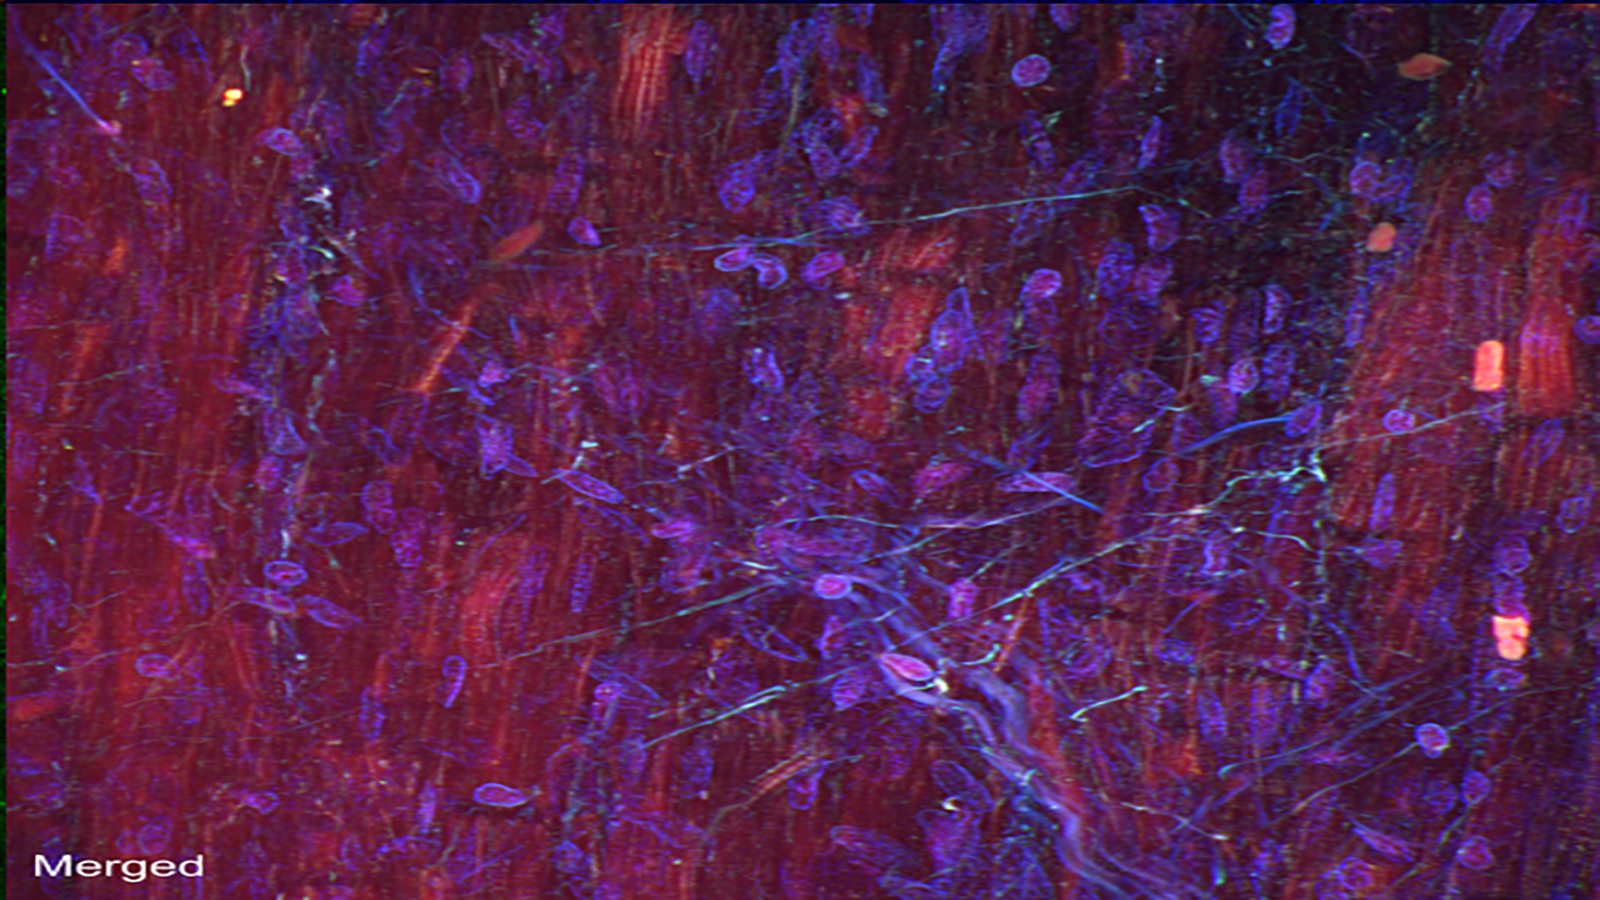 Autofluorescence image capturing heart cells (red), nuclei (blue), and dense fibers of the heart (green), courtesy of Dr. Seth Currlin at University of Florida